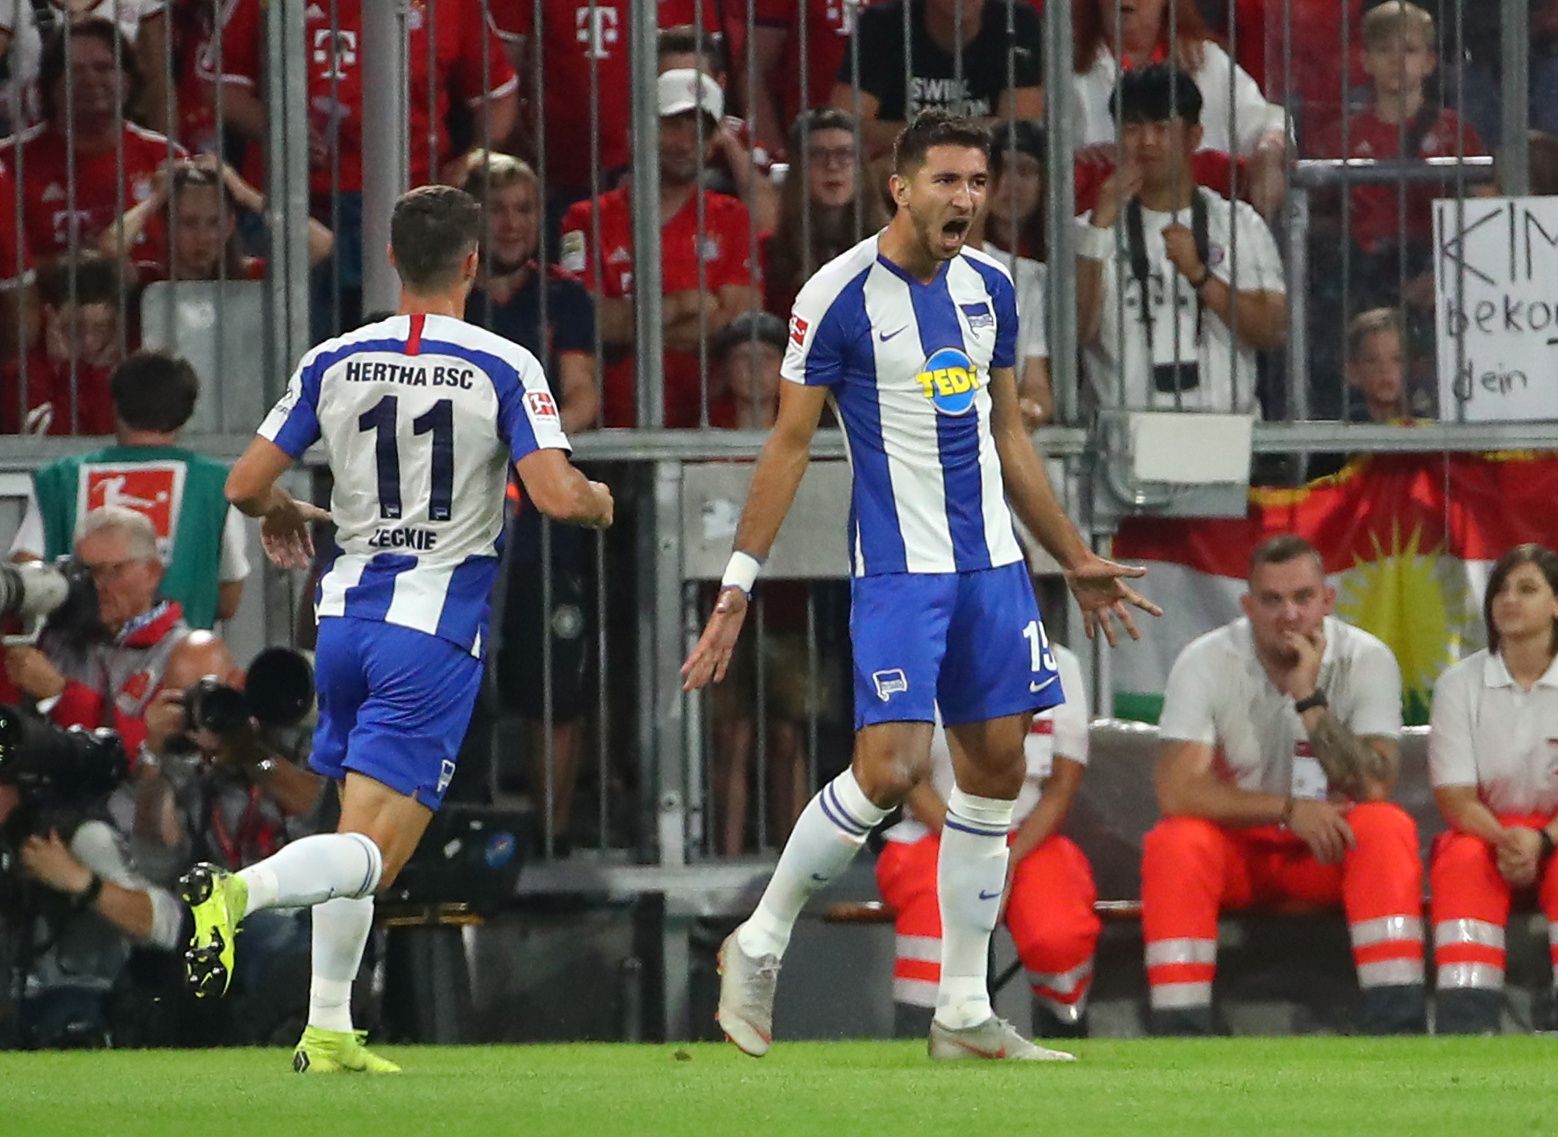 Soccer Football - Bundesliga - Bayern Munich v Hertha BSC - Allianz Arena, Munich, Germany - August 16, 2019   Hertha BSC's Marko Grujic celebrates scoring their second goal               REUTERS/Michael Dalder    DFL regulations prohibit any use of photographs as image sequences and/or quasi-video